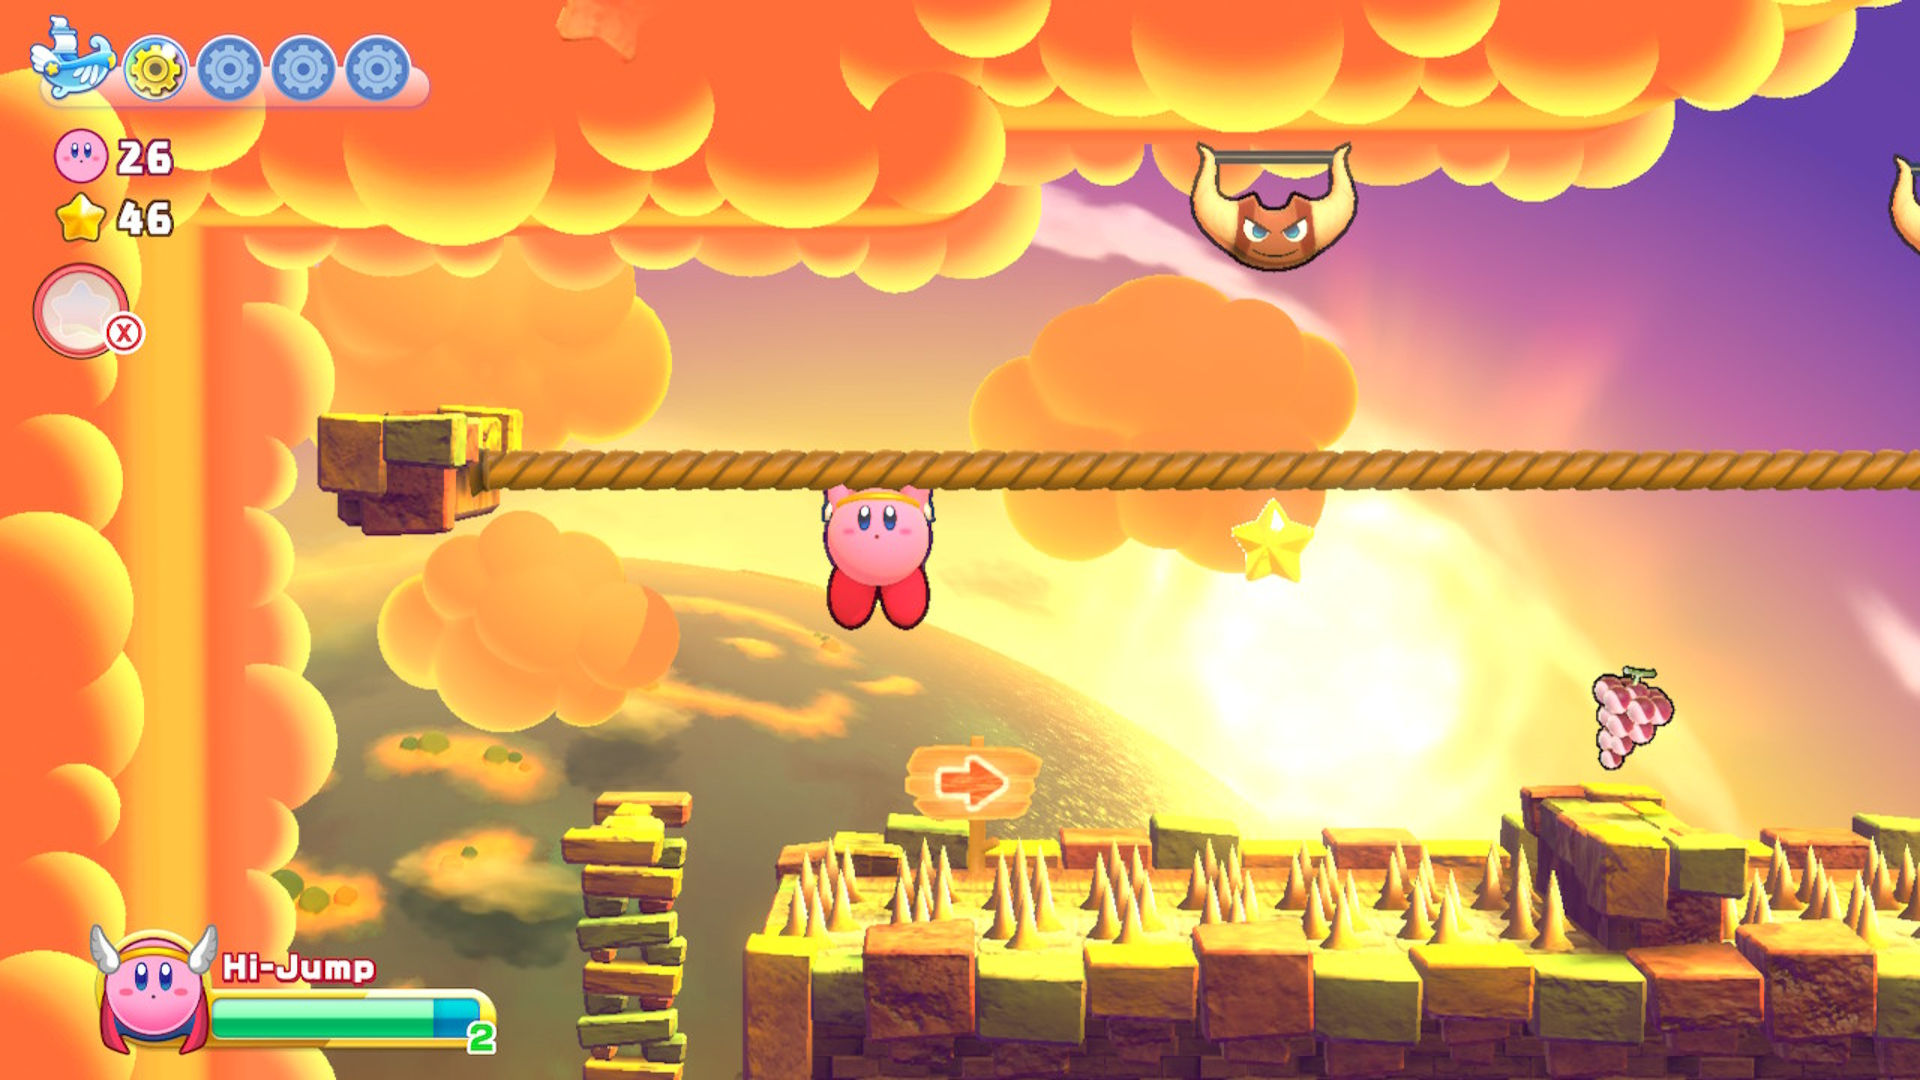 Review: 'Kirby's Return to Dream Land' brings back an overlooked gem